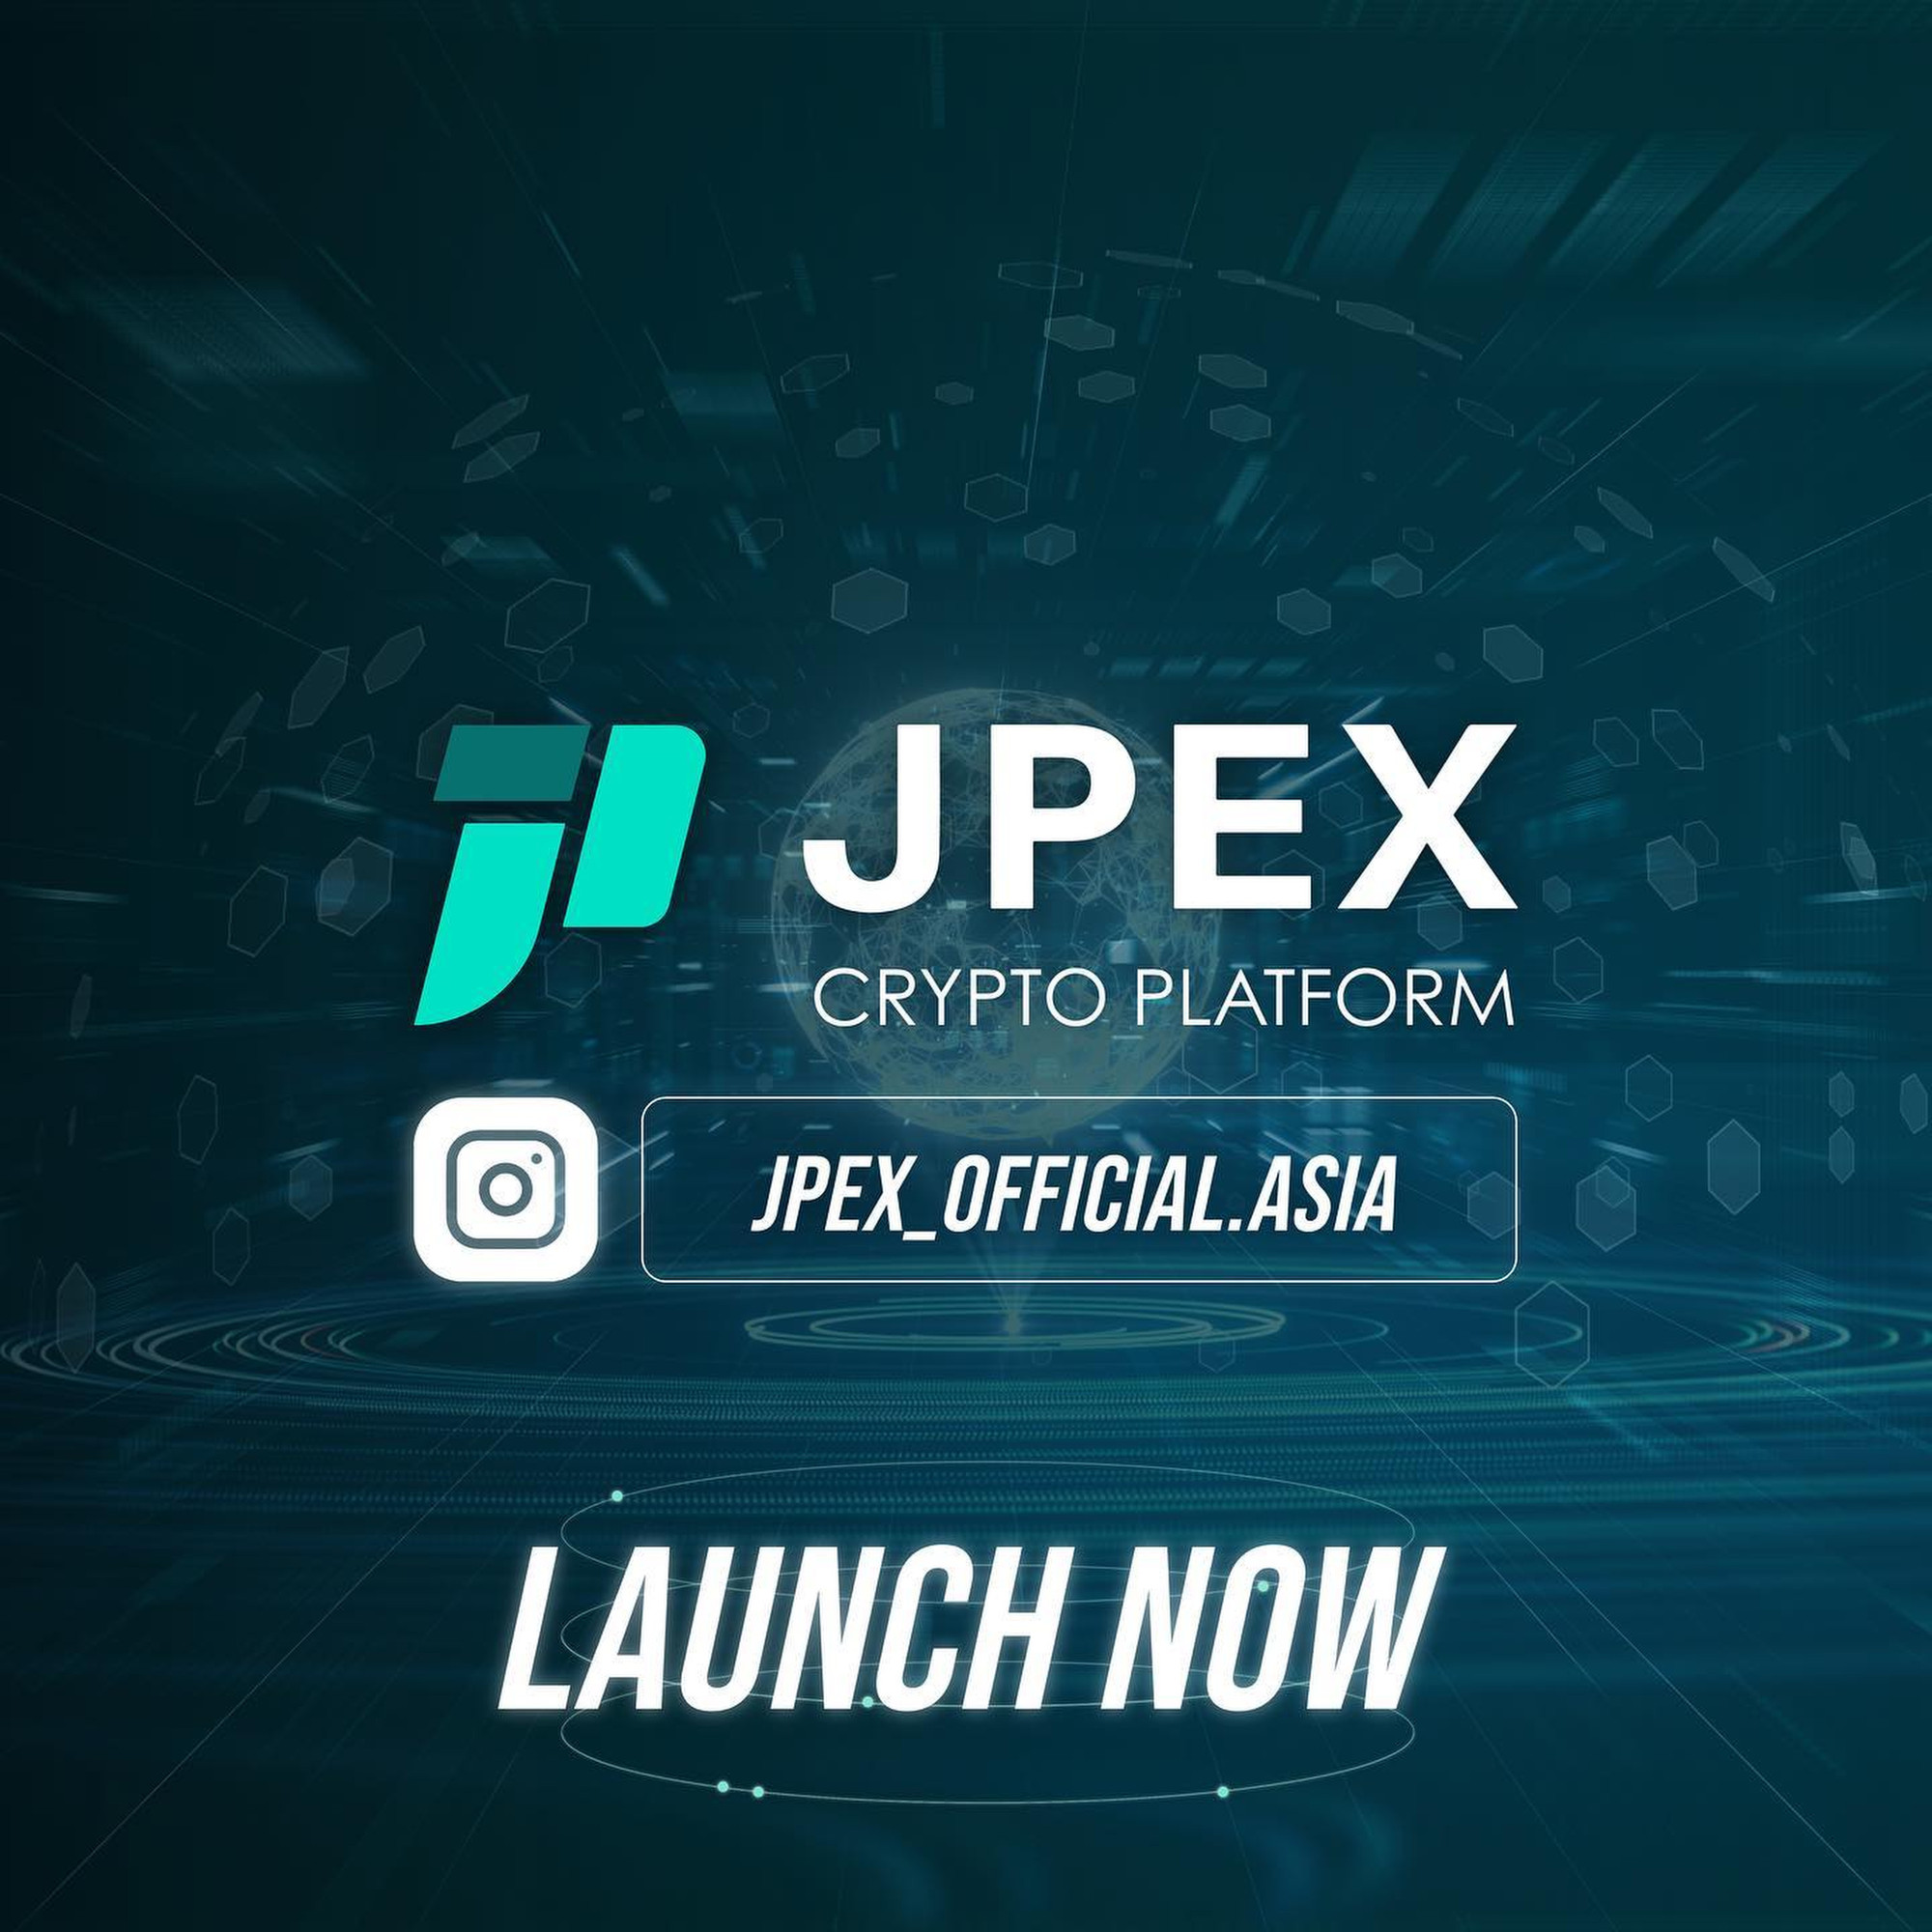 An ad for JPEX-Crypto Platform on the internet.